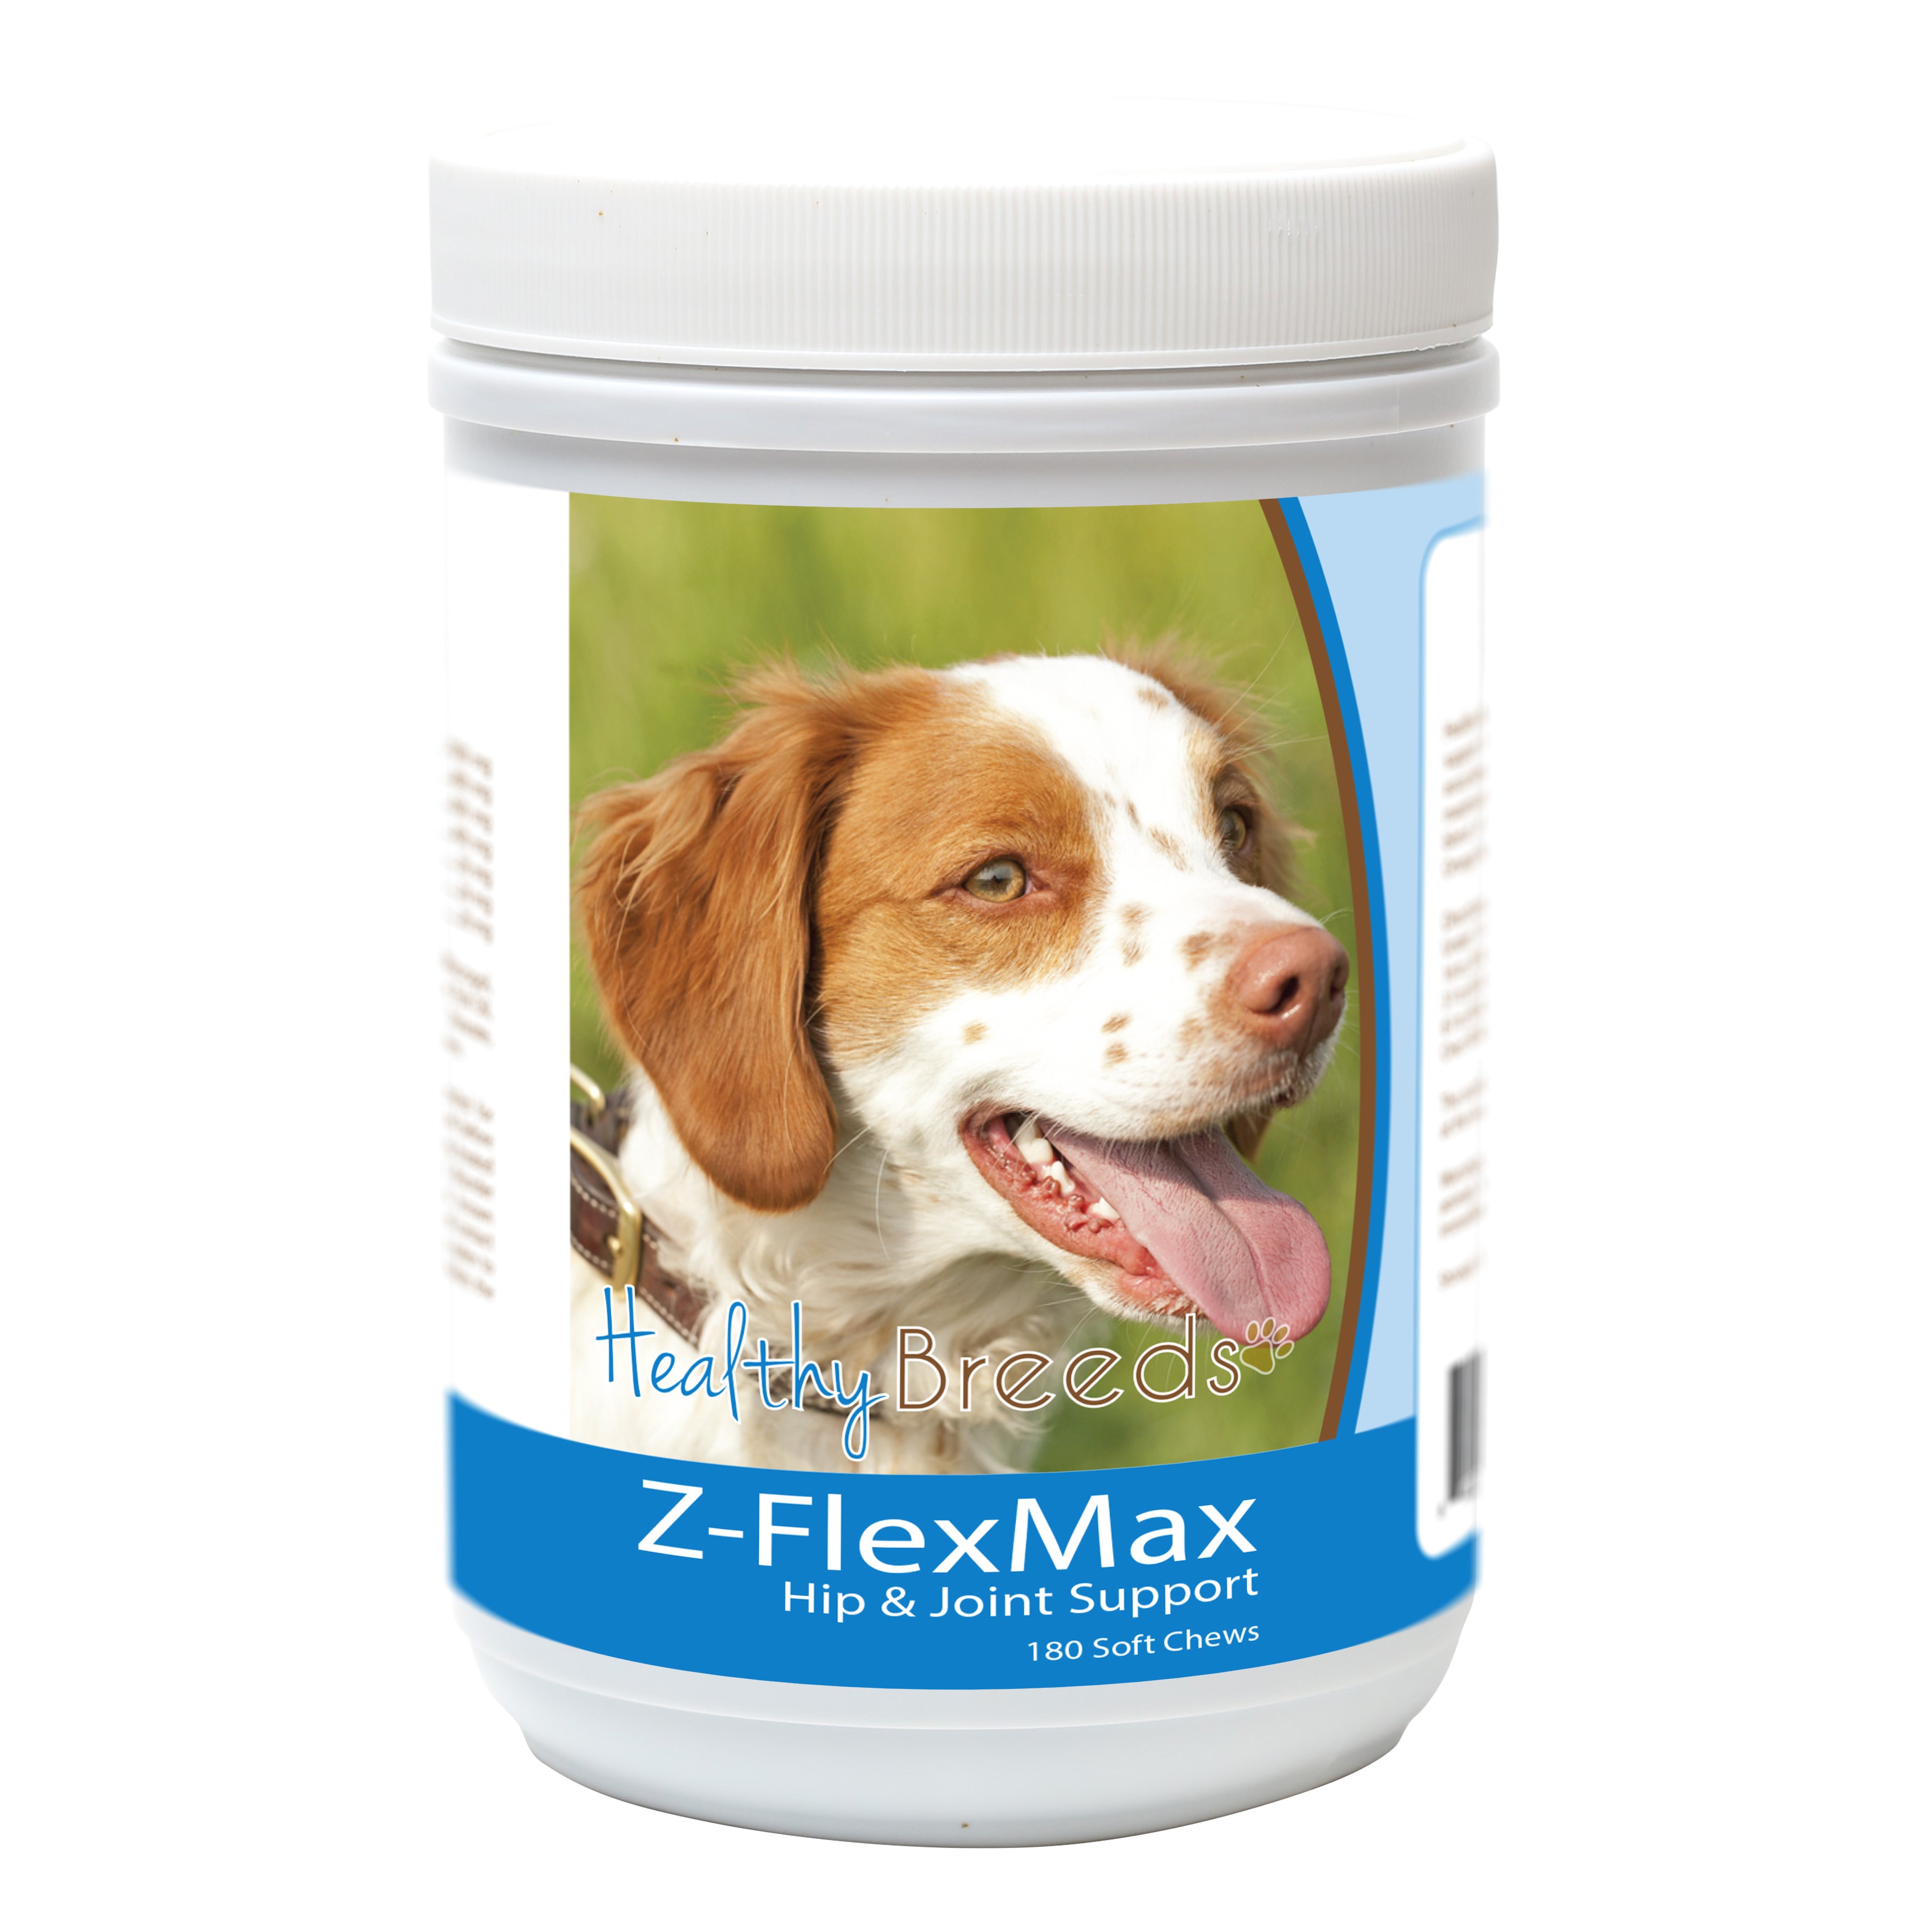 Brittany Z-Flex Max Dog Hip and Joint Support 180 Count